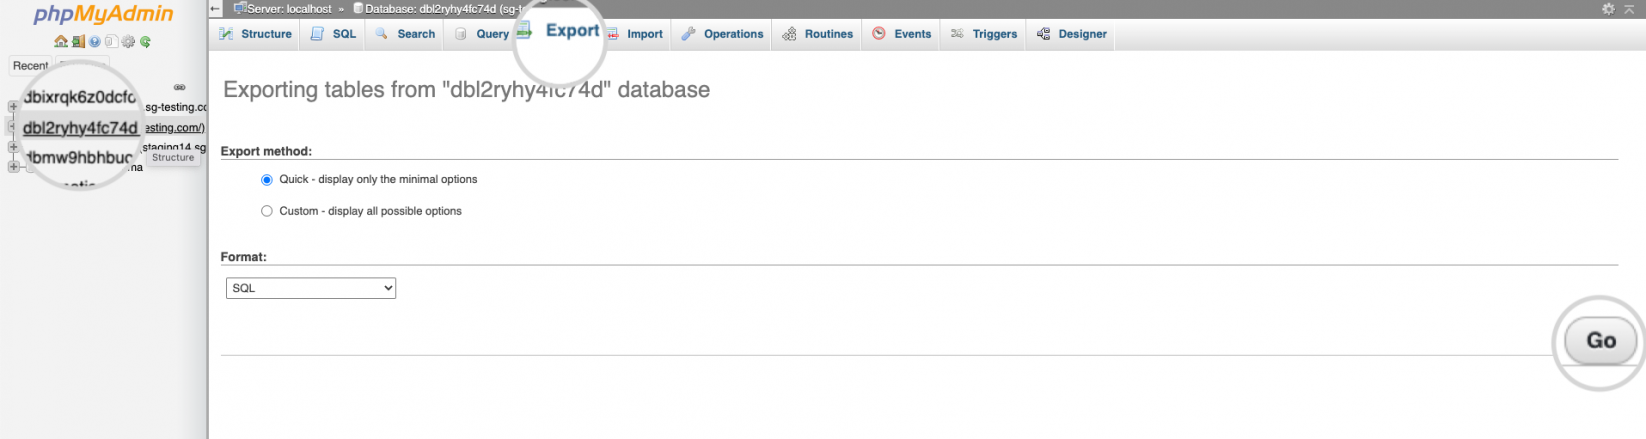 Export the database from phpMyAdmin